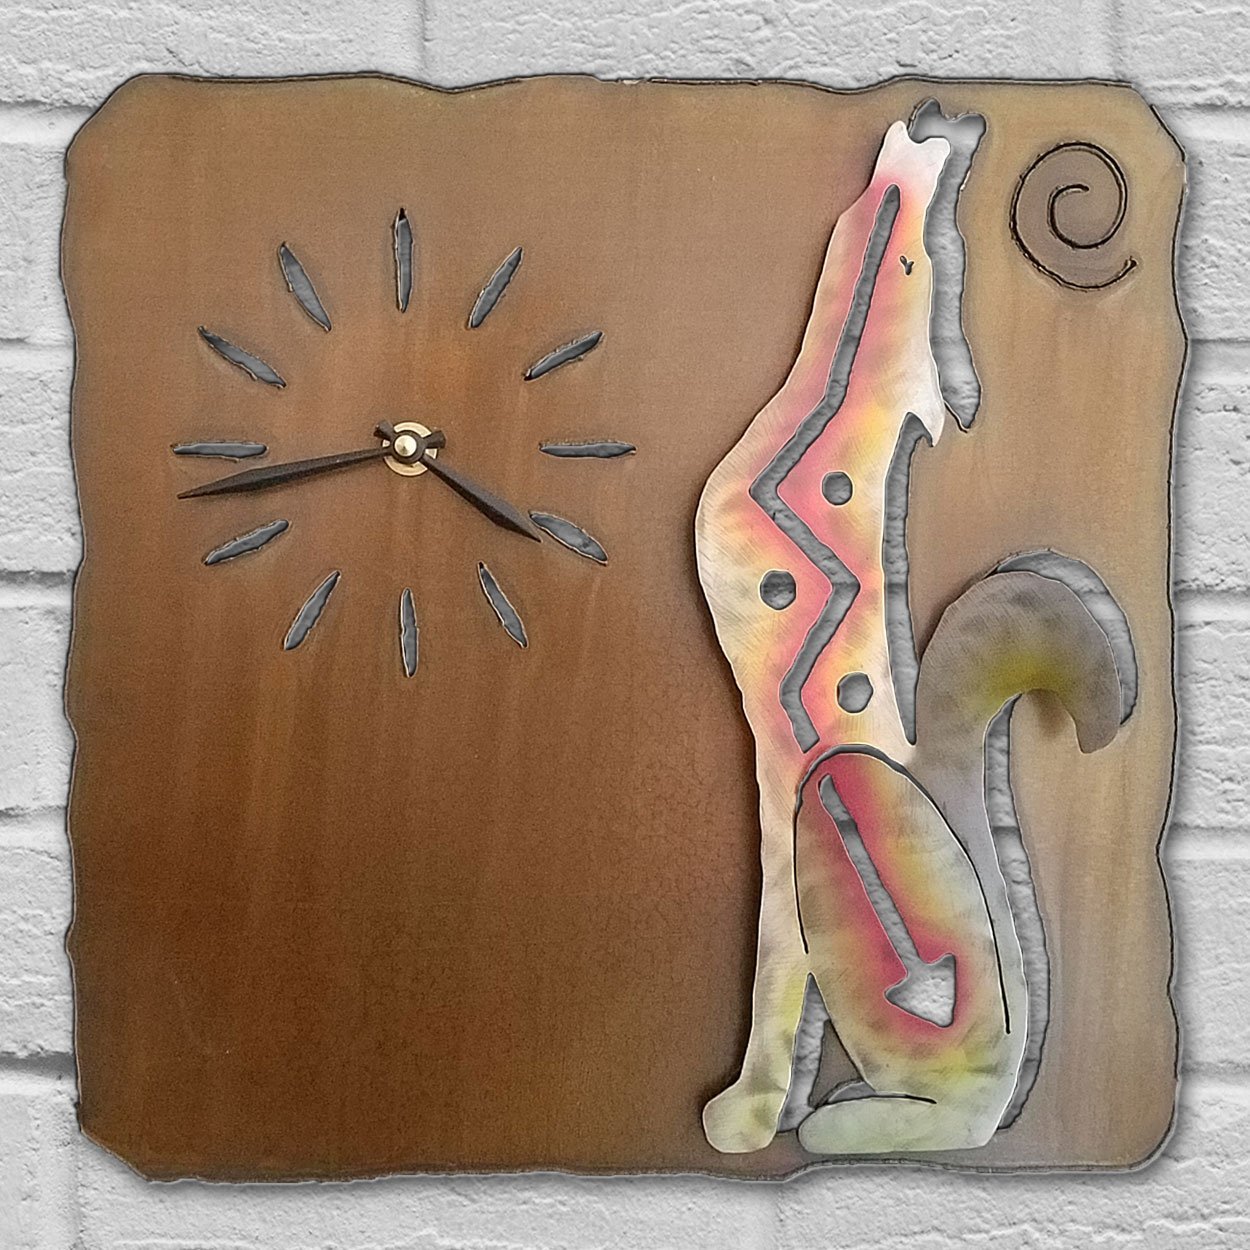 165751 - 13in Southwest Decor Howling Coyote Metal Wall Clock in Sunset Finish